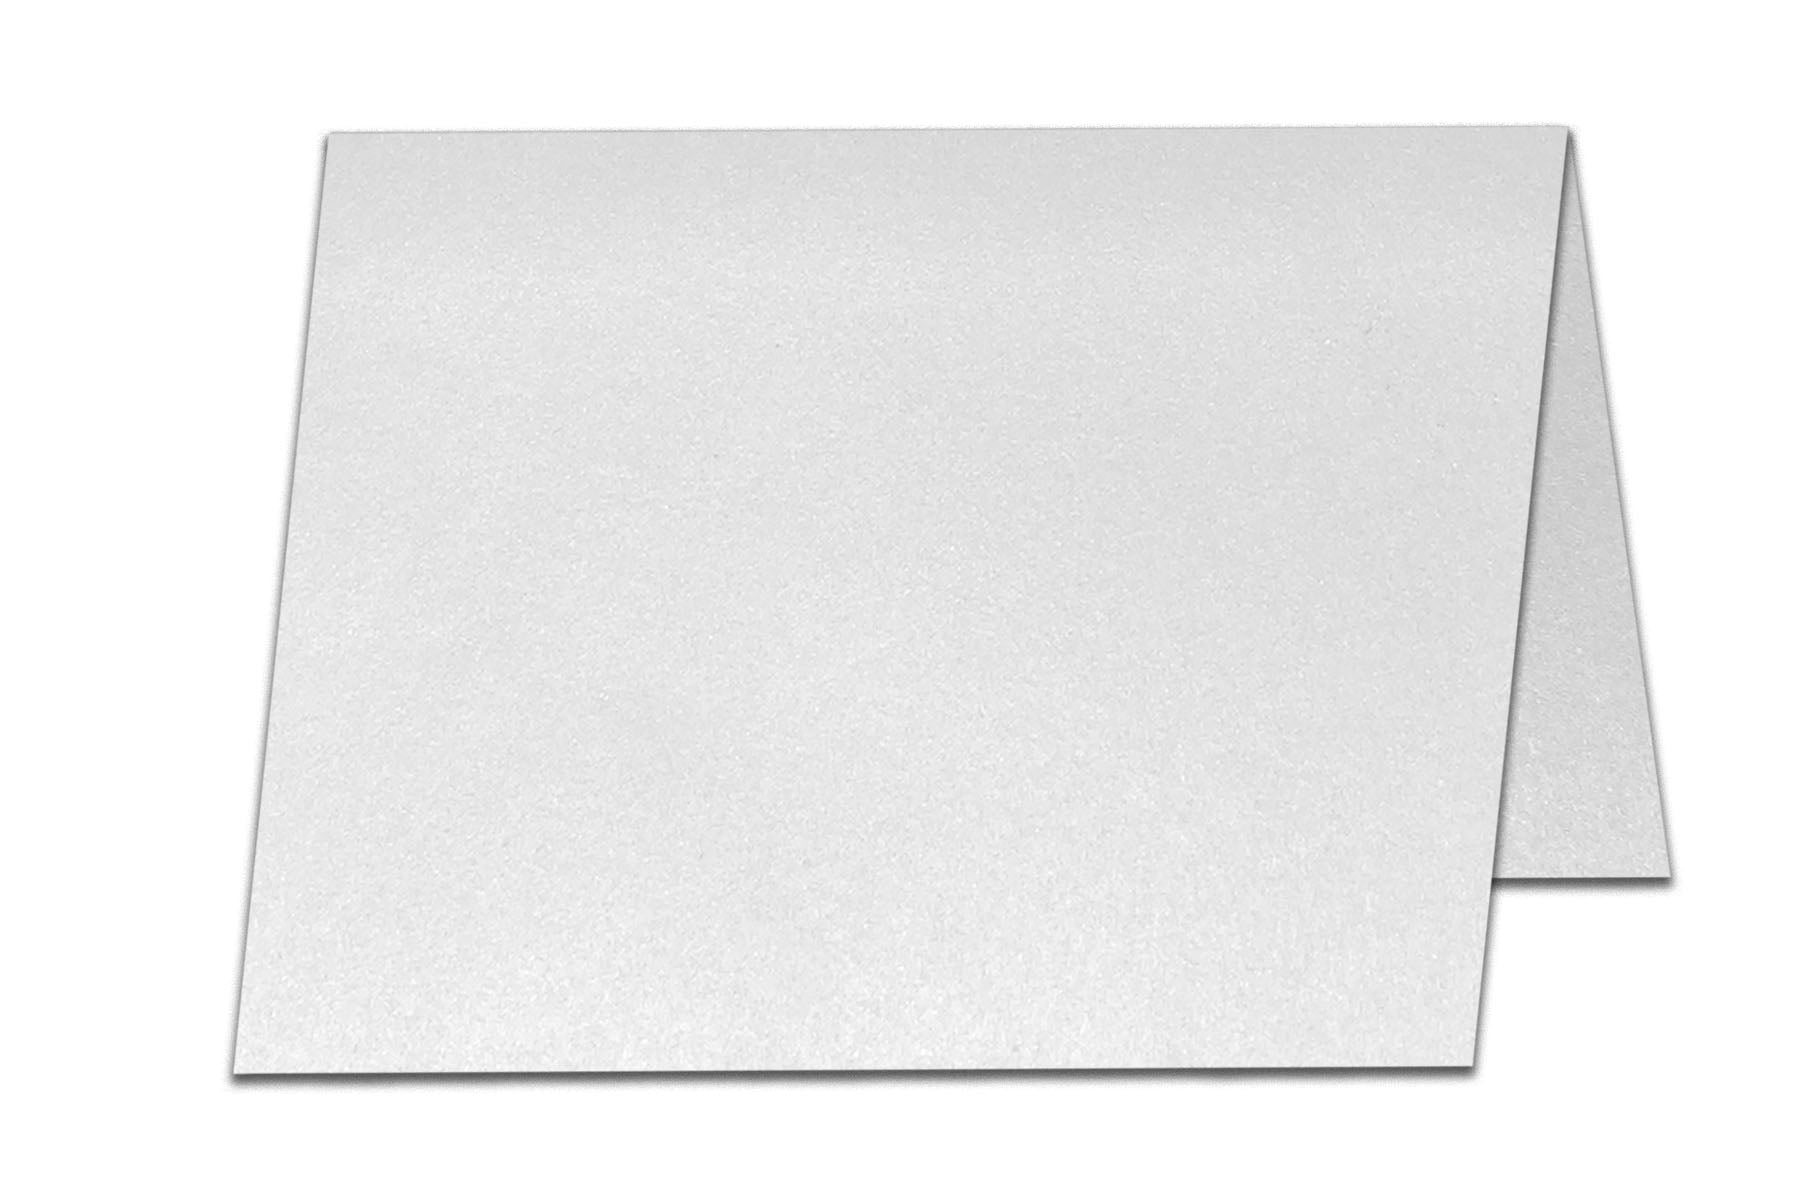 Blank Shimmer A6 Folded Discount Card Stock for DIY Cards - CutCardStock